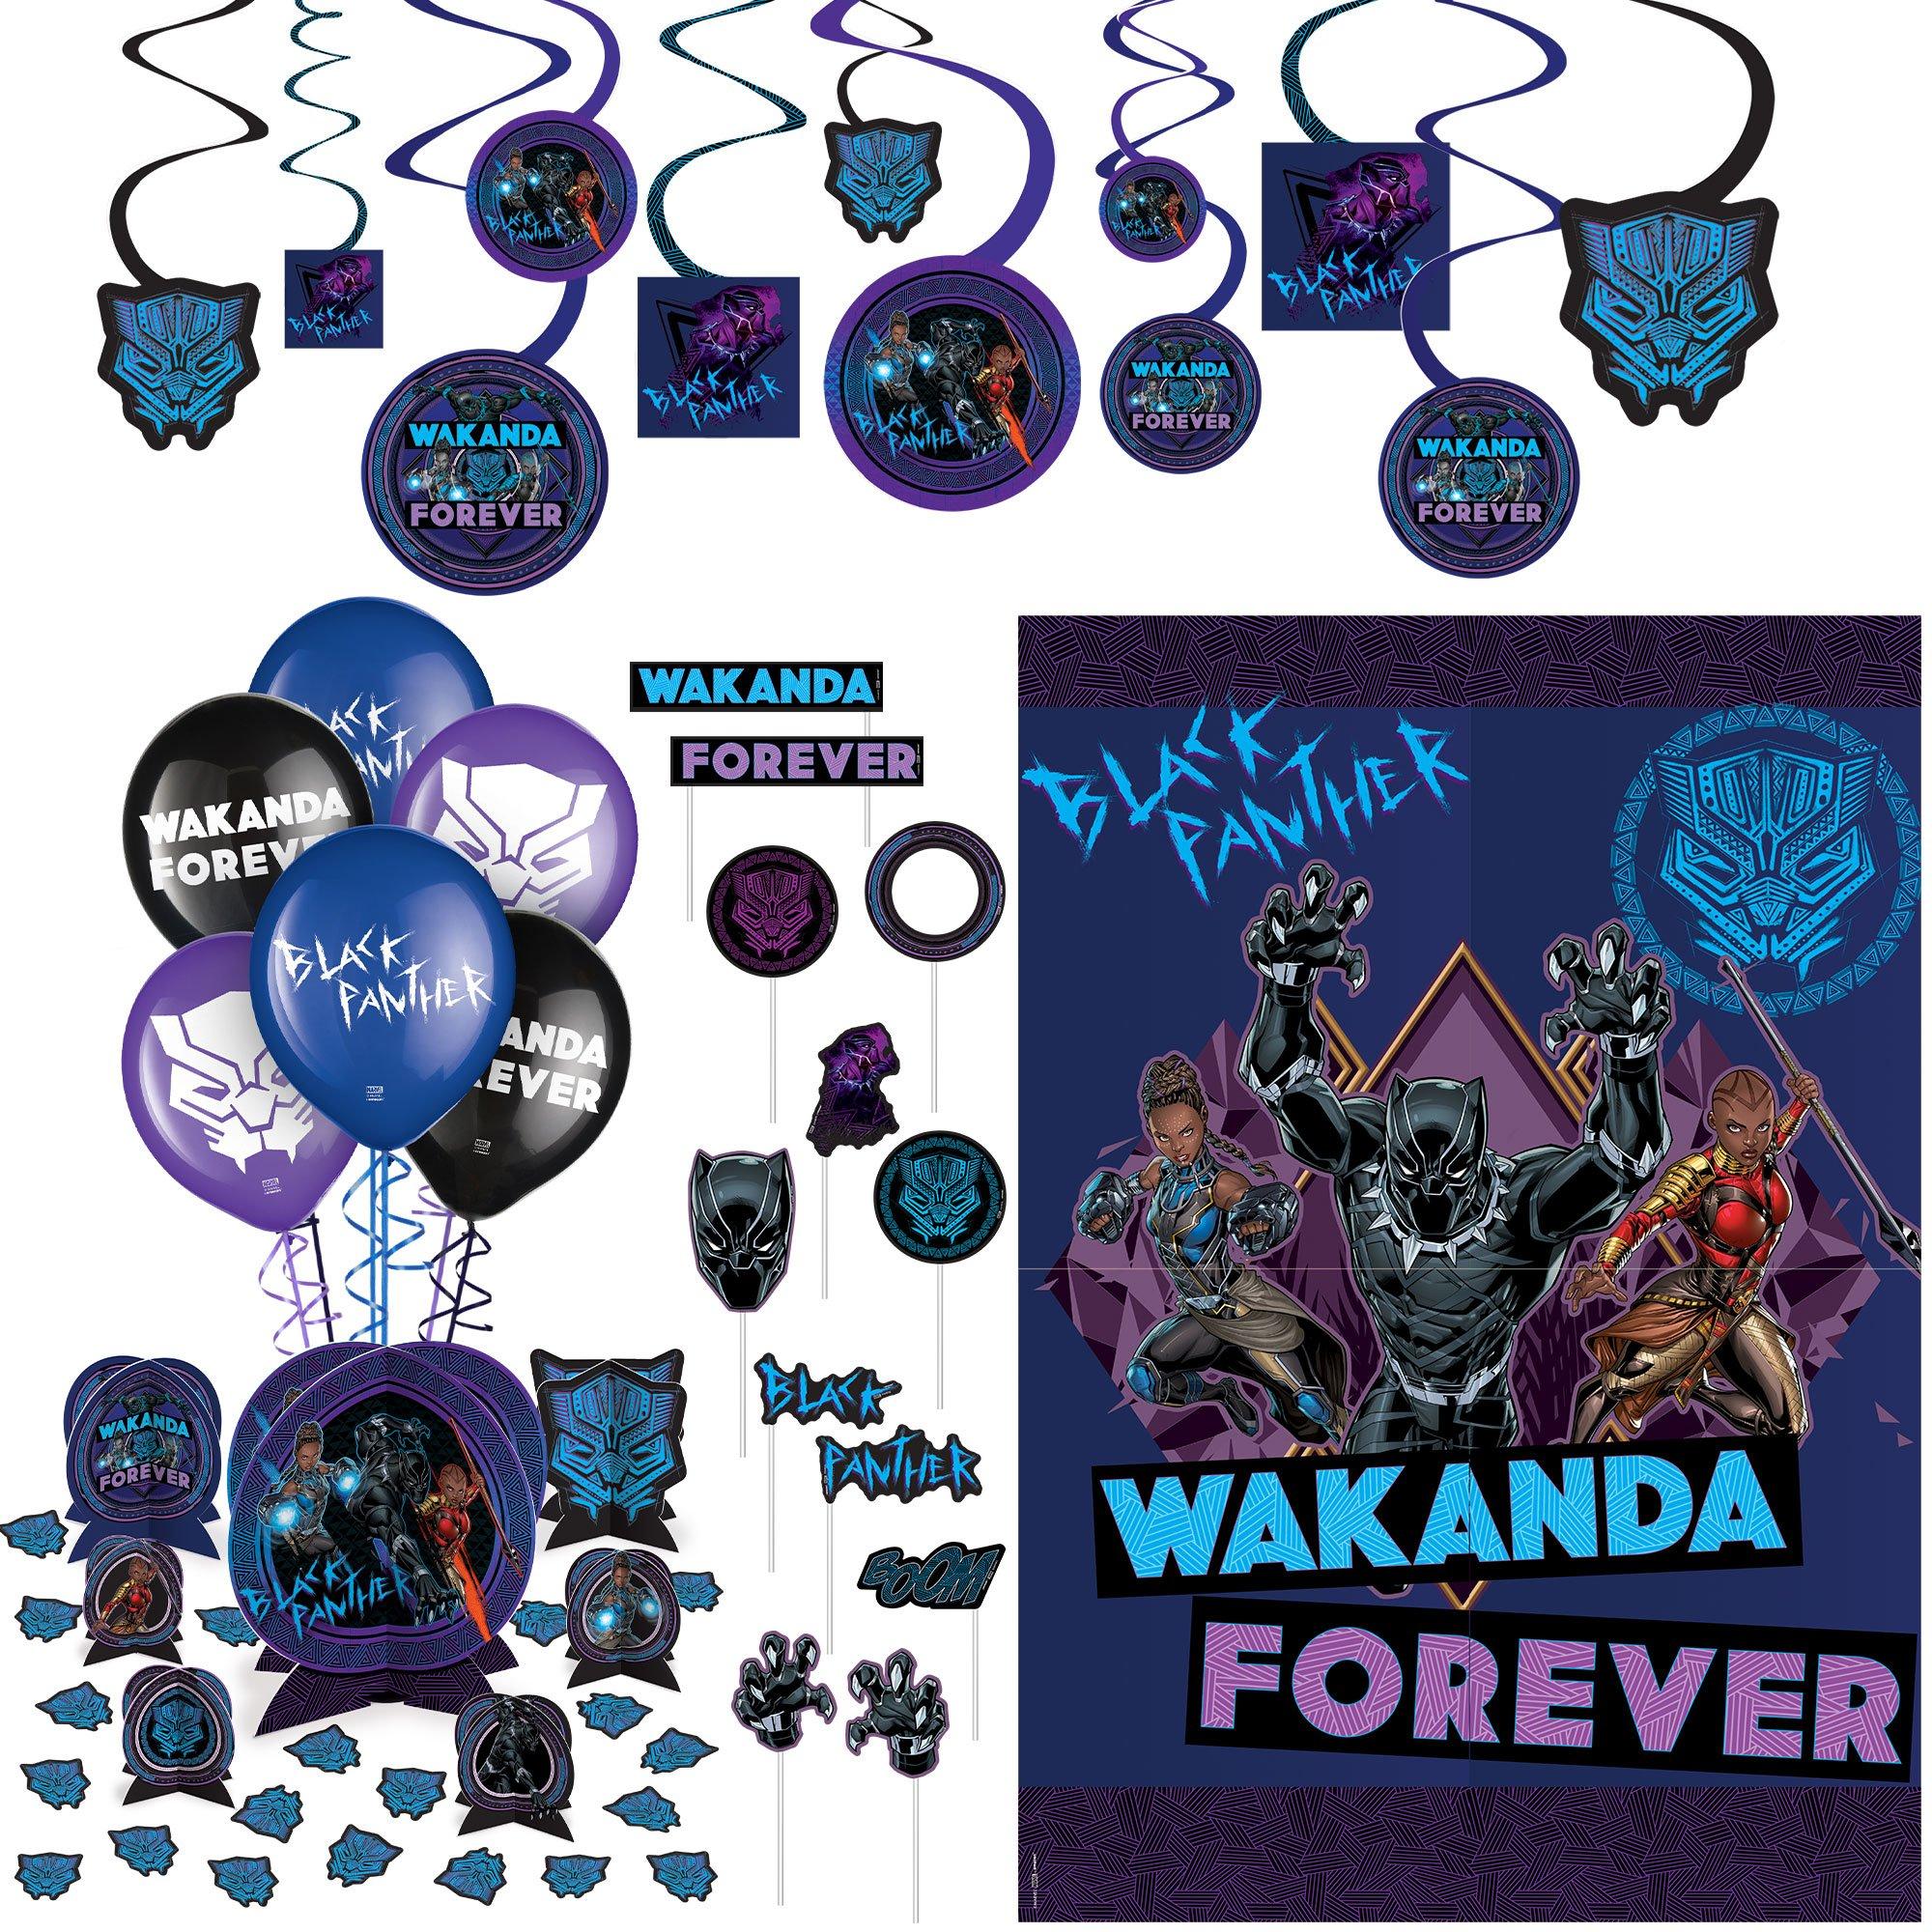 Black Panther Wakanda Forever Party Decorating Supplies Pack - Kit Includes Centerpieces, Themed Latex Balloons, Scene Setter, Photo Booth Props, & Swirl Decorations